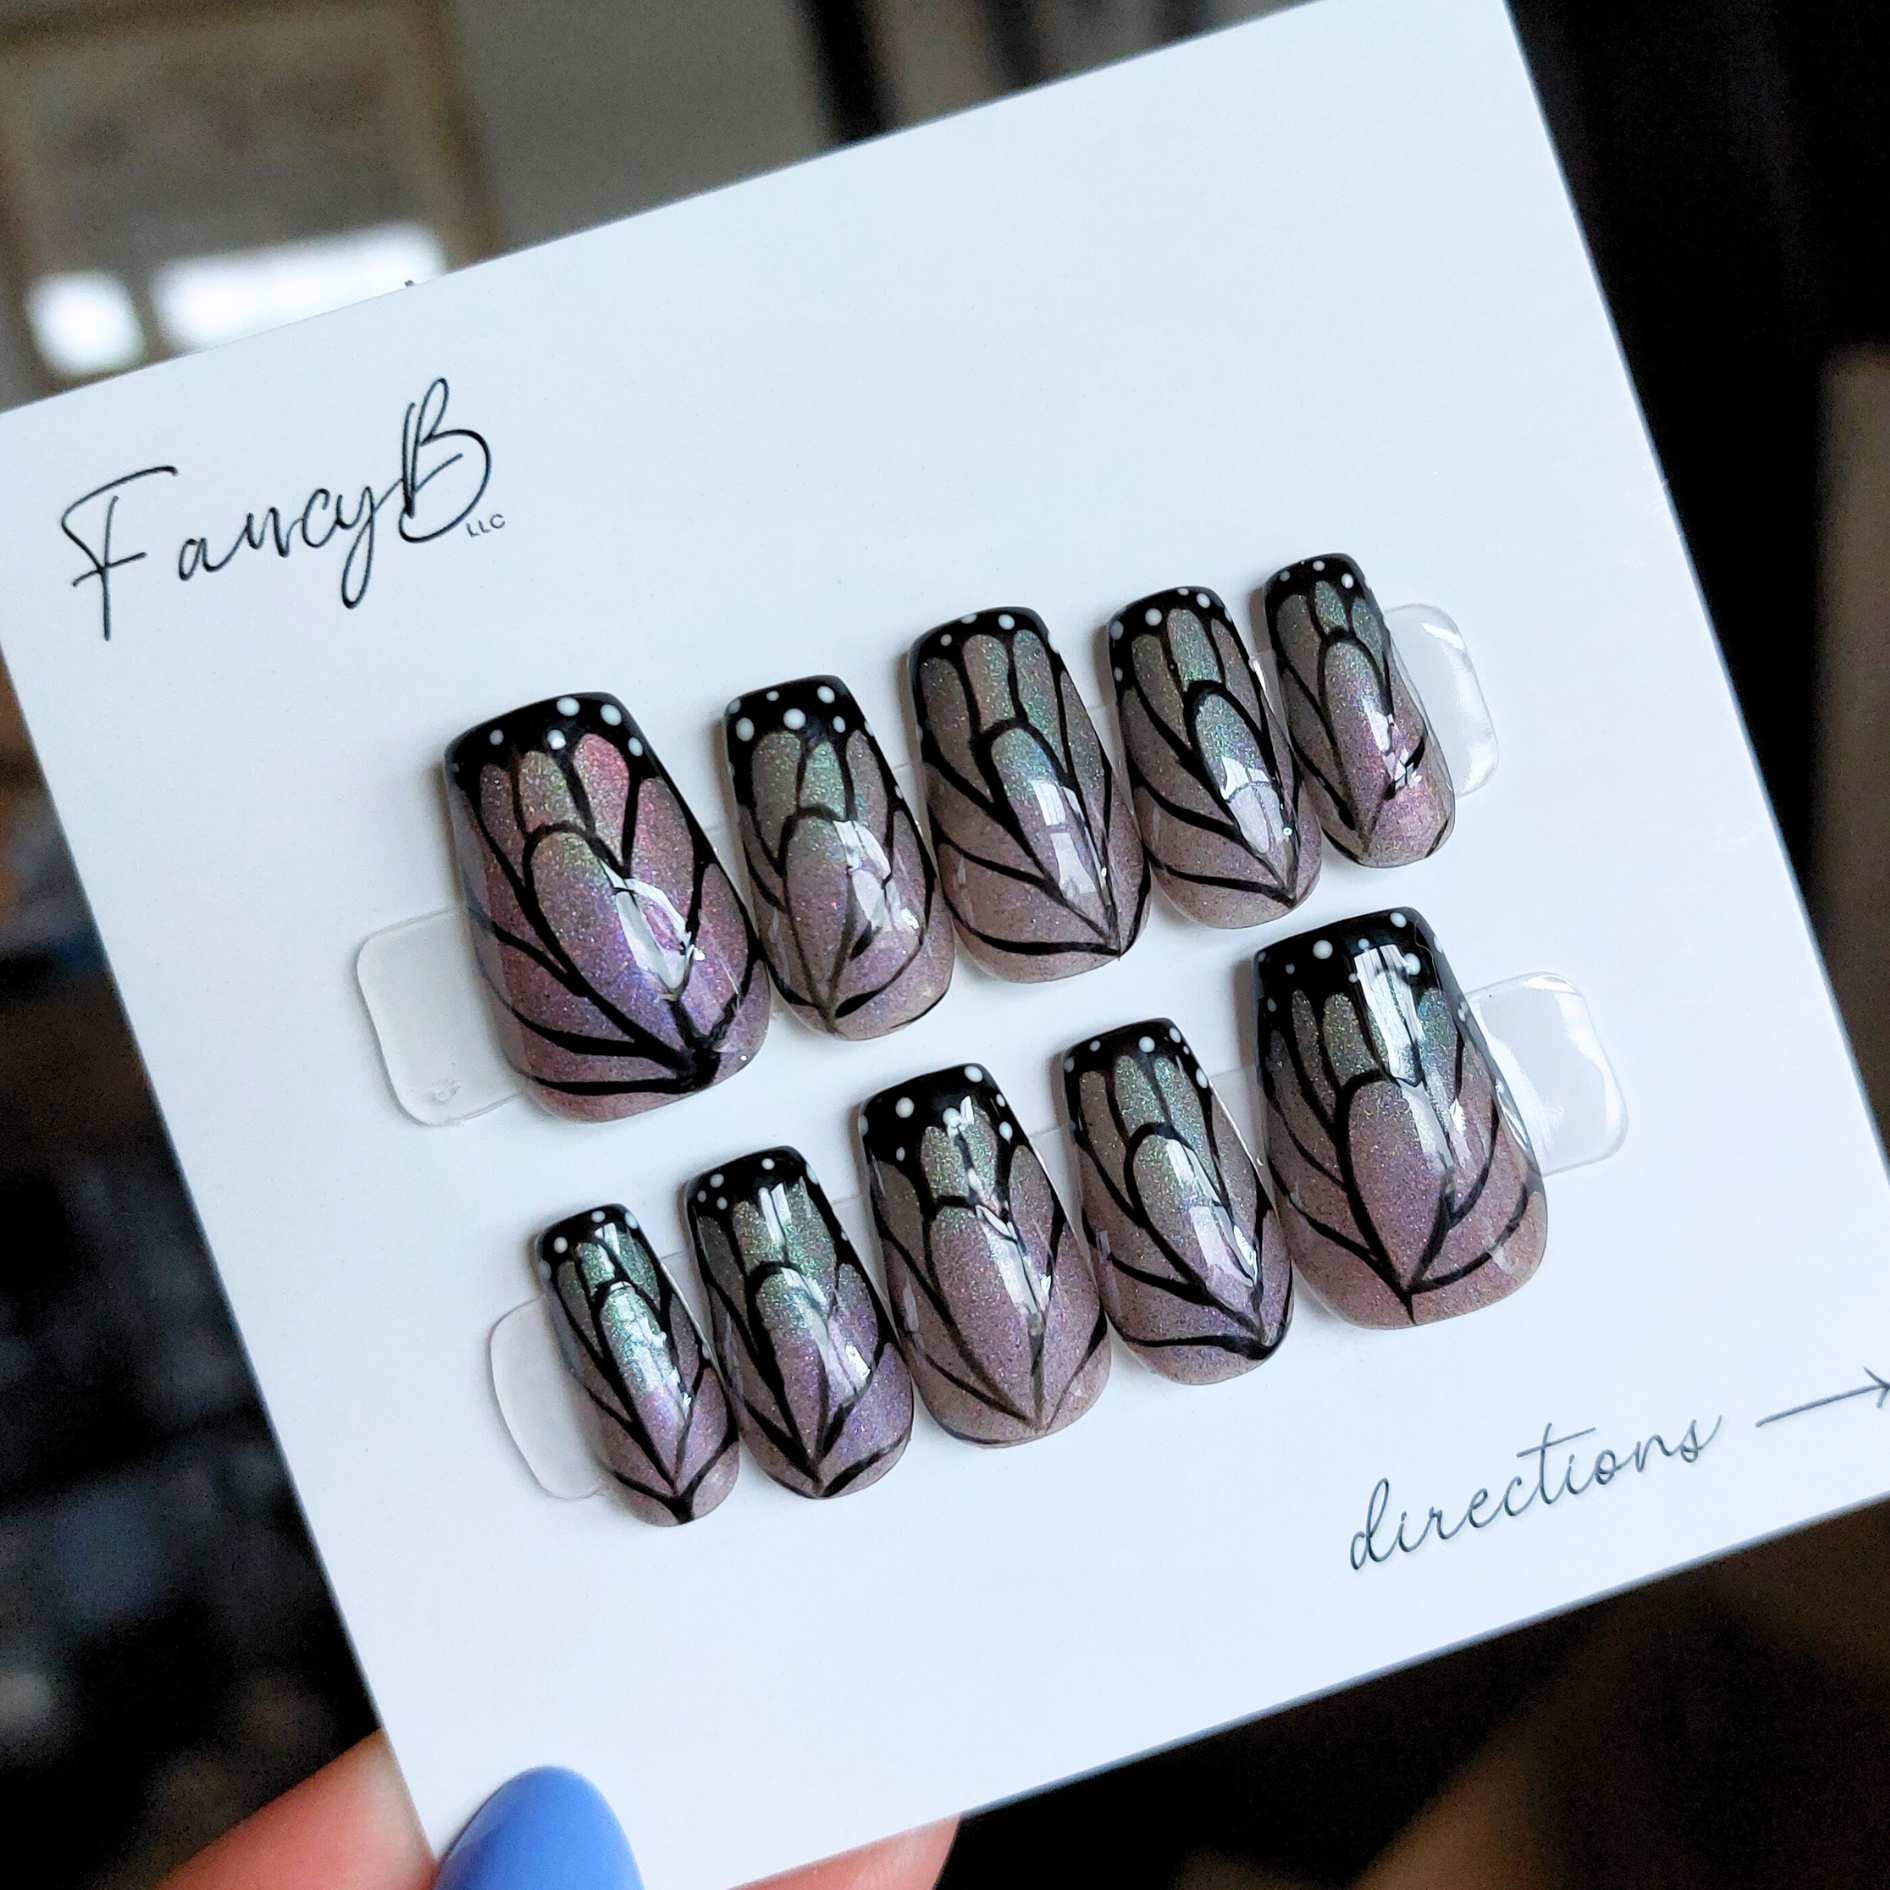 custom butterfly wing nails with monarch designs with purple to green ombre on short coffin shape from fancyb press on nails